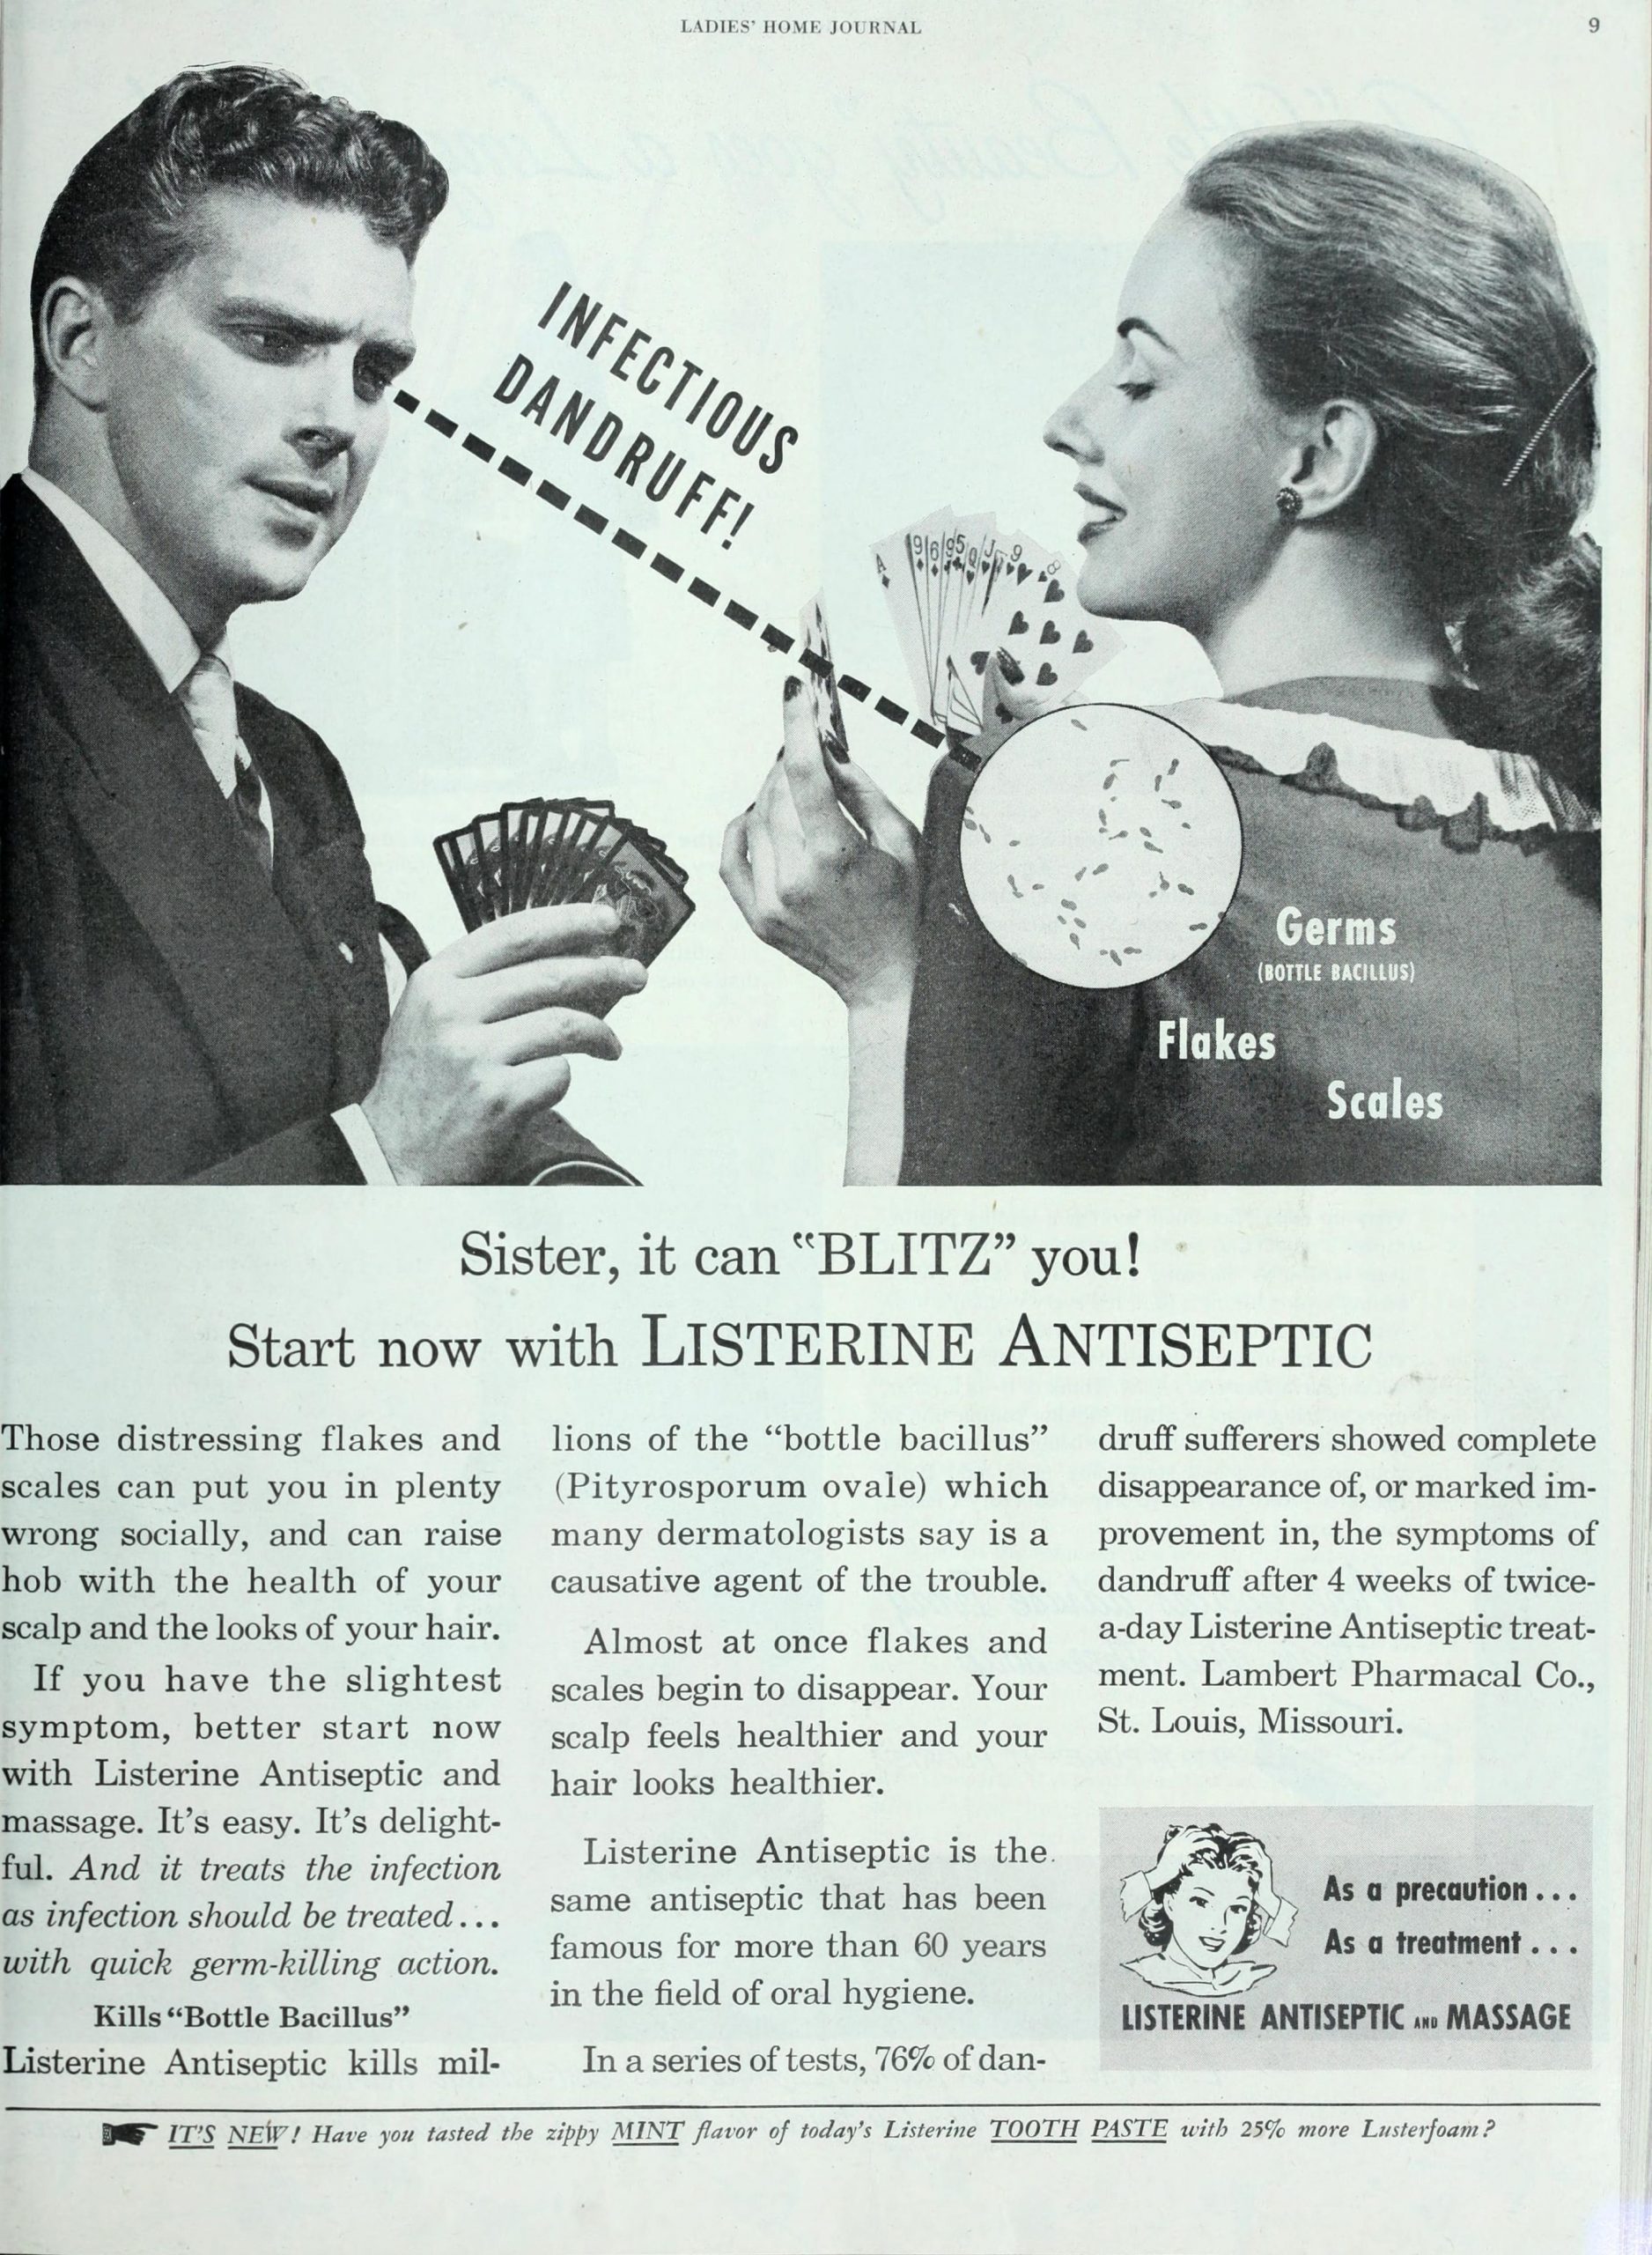 black and white ad of man and woman with the man looking at the woman's dandruff